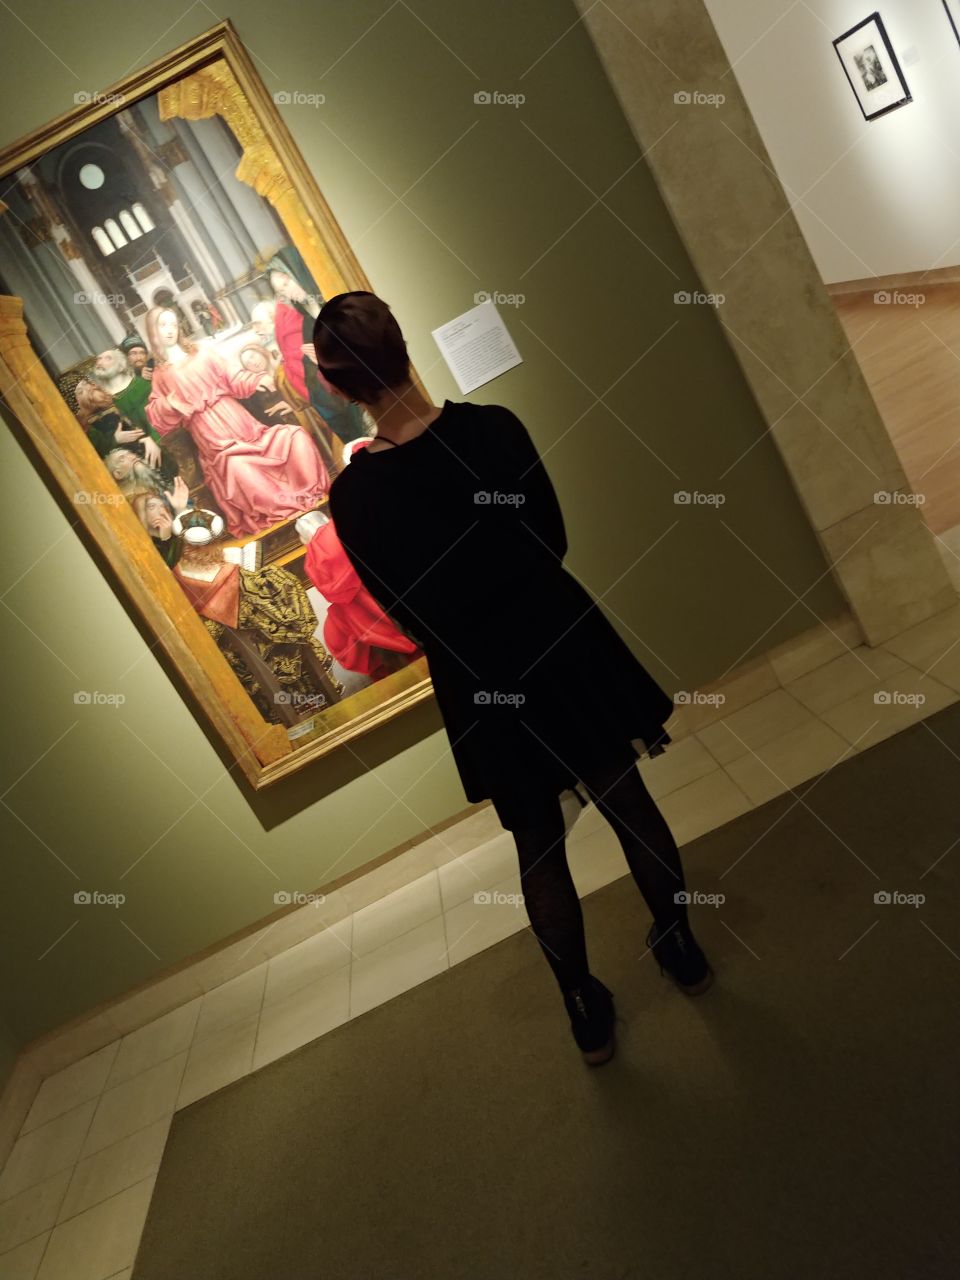 My companion took me to the museum; even with all the masterpieces around me, I couldn't keep my eyes off of her... [Art viewing art.]